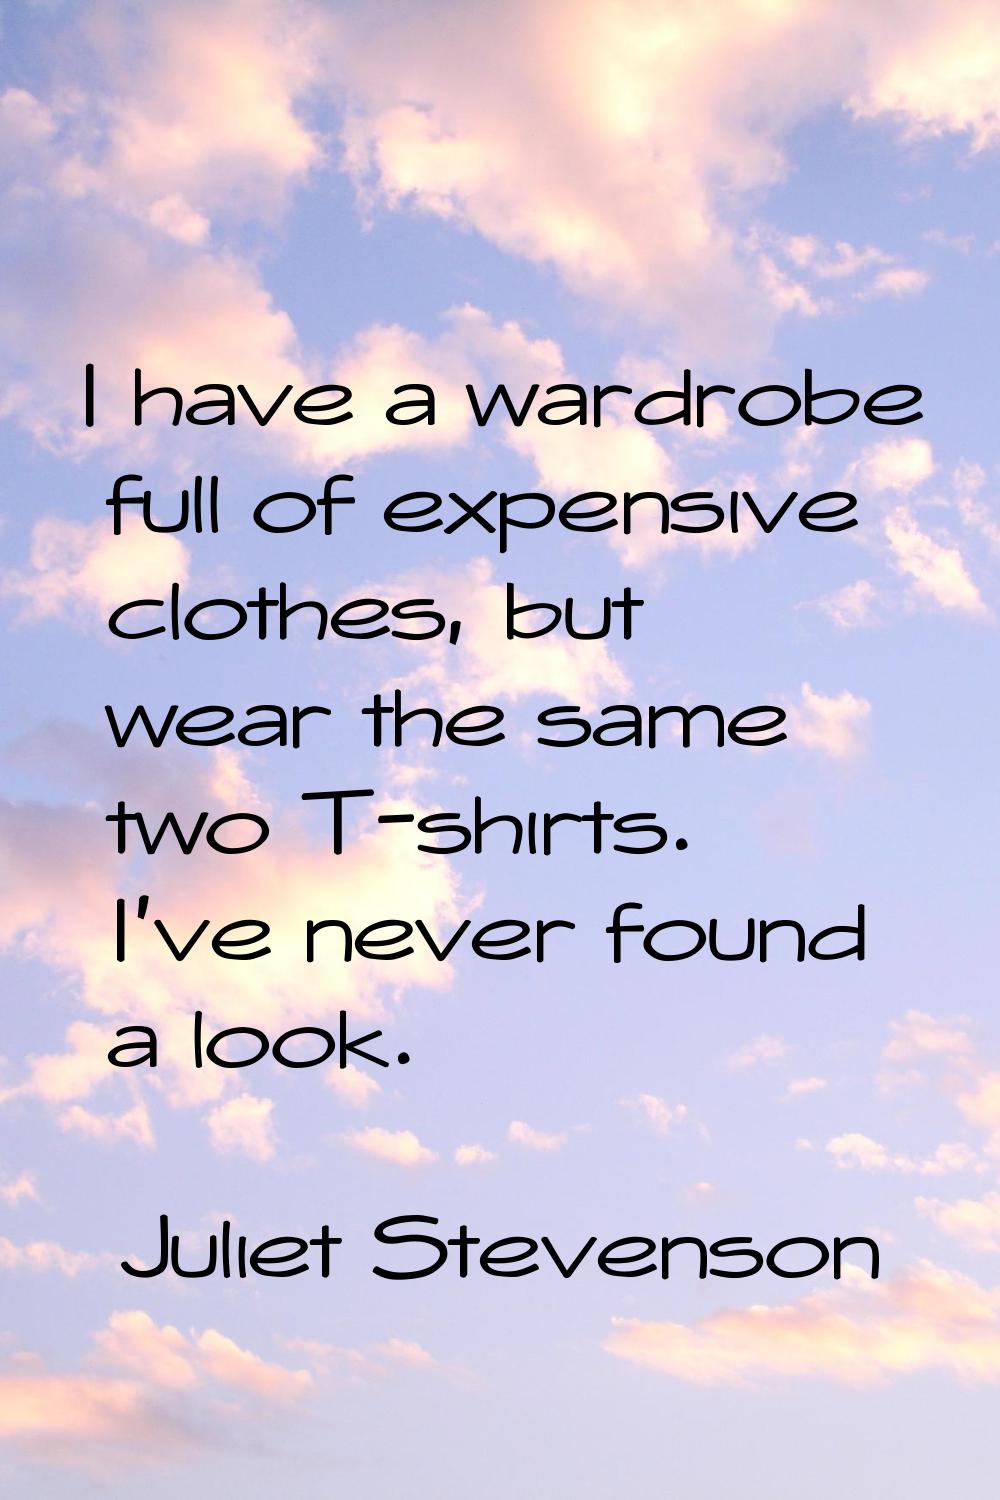 I have a wardrobe full of expensive clothes, but wear the same two T-shirts. I've never found a loo